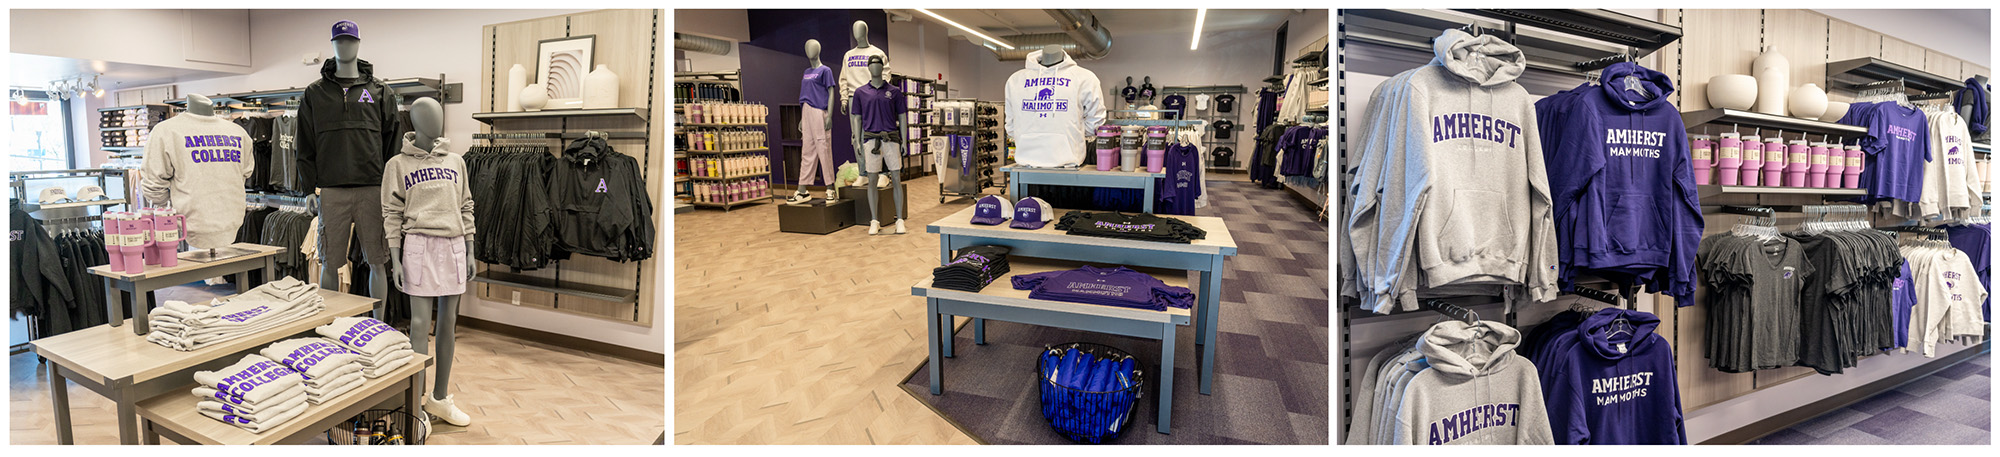 Three views of a retail store showing СCollege merchandise